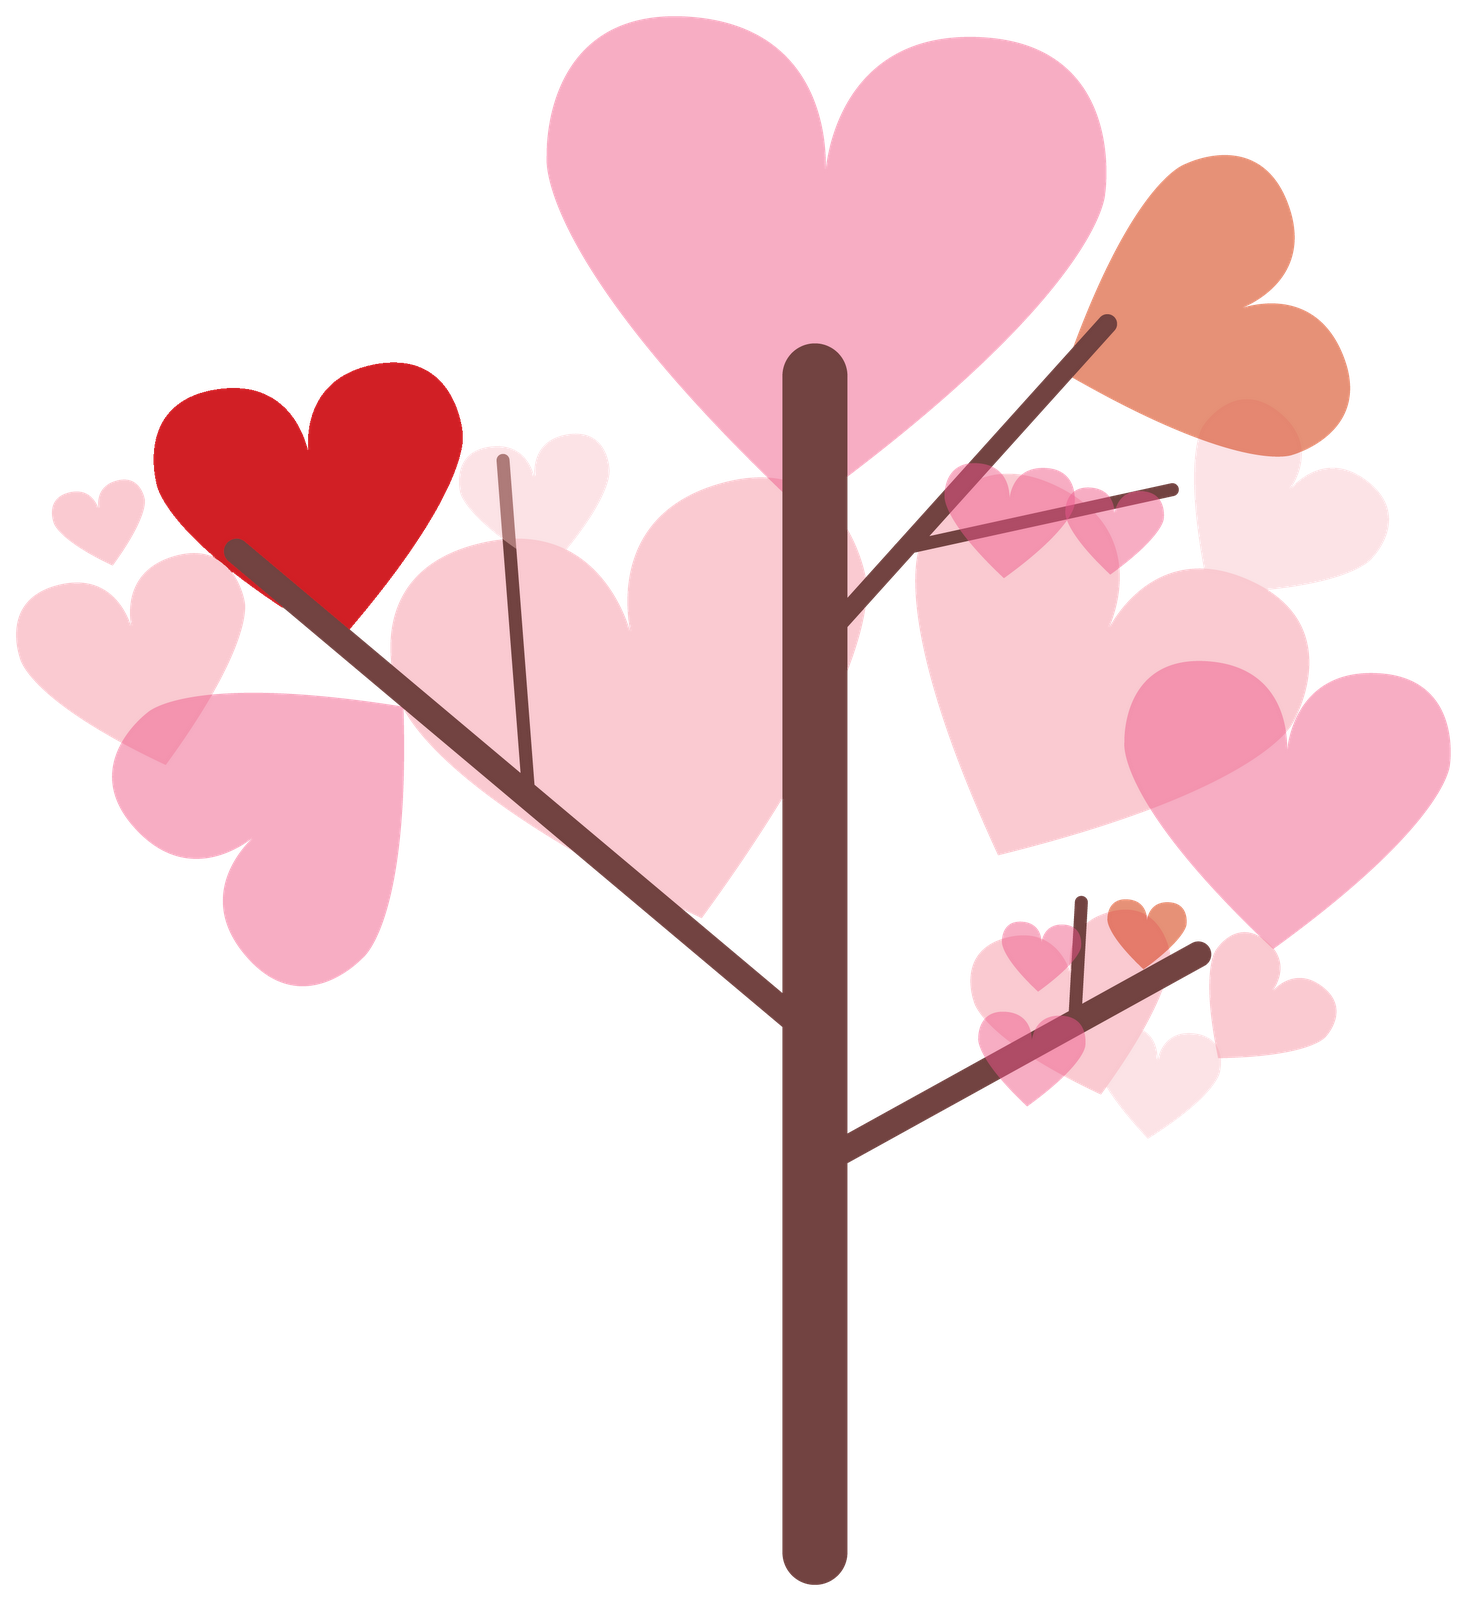 Free Love Cliparts, Download Free Clip Art, Free Clip Art on.